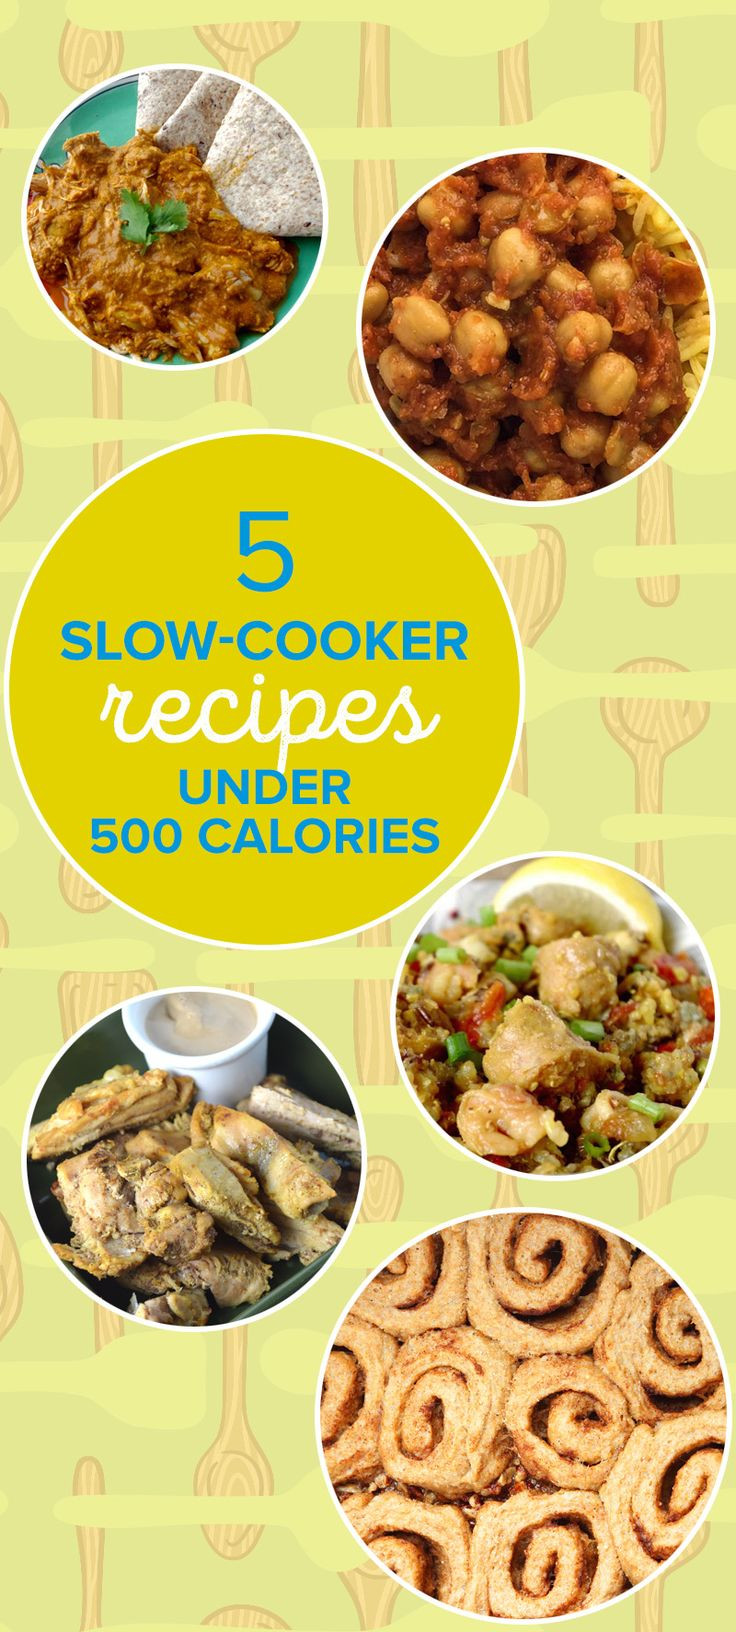 500 Heart Healthy Slow Cooker Recipes
 1000 images about SLOW COOKER on Pinterest